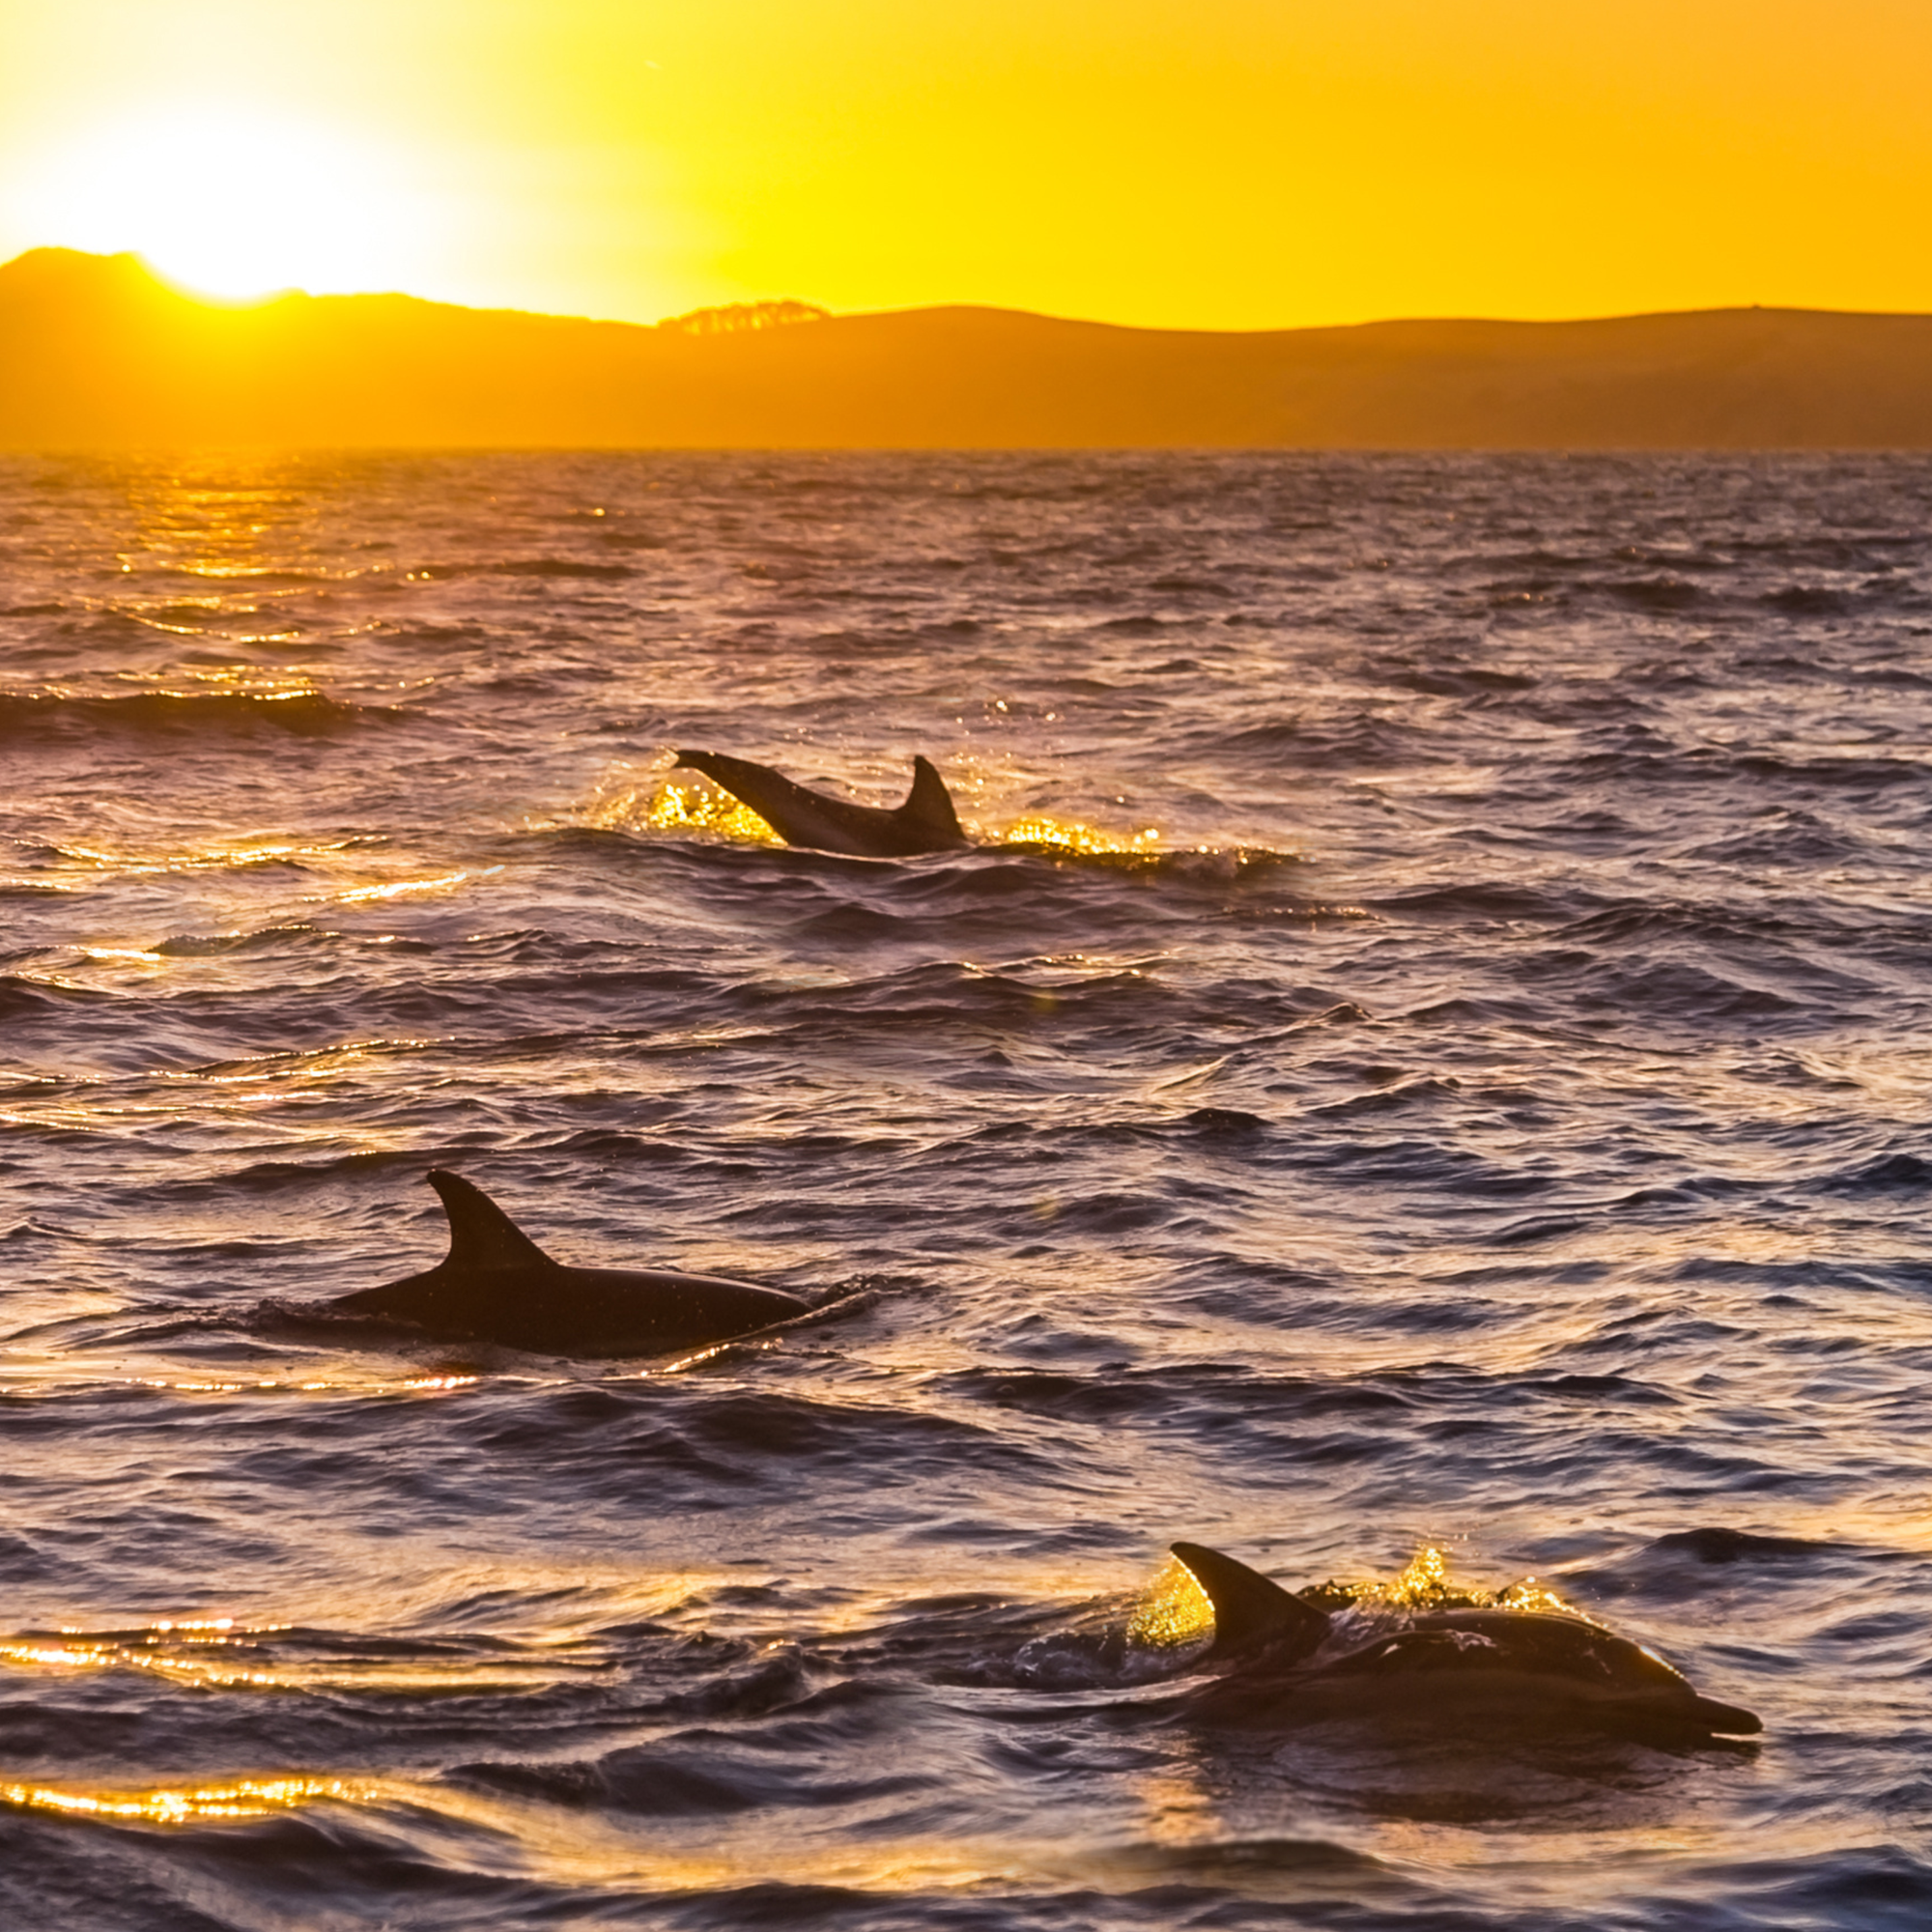 Dolphins swimming in the ocean with a sun setting on the horizon